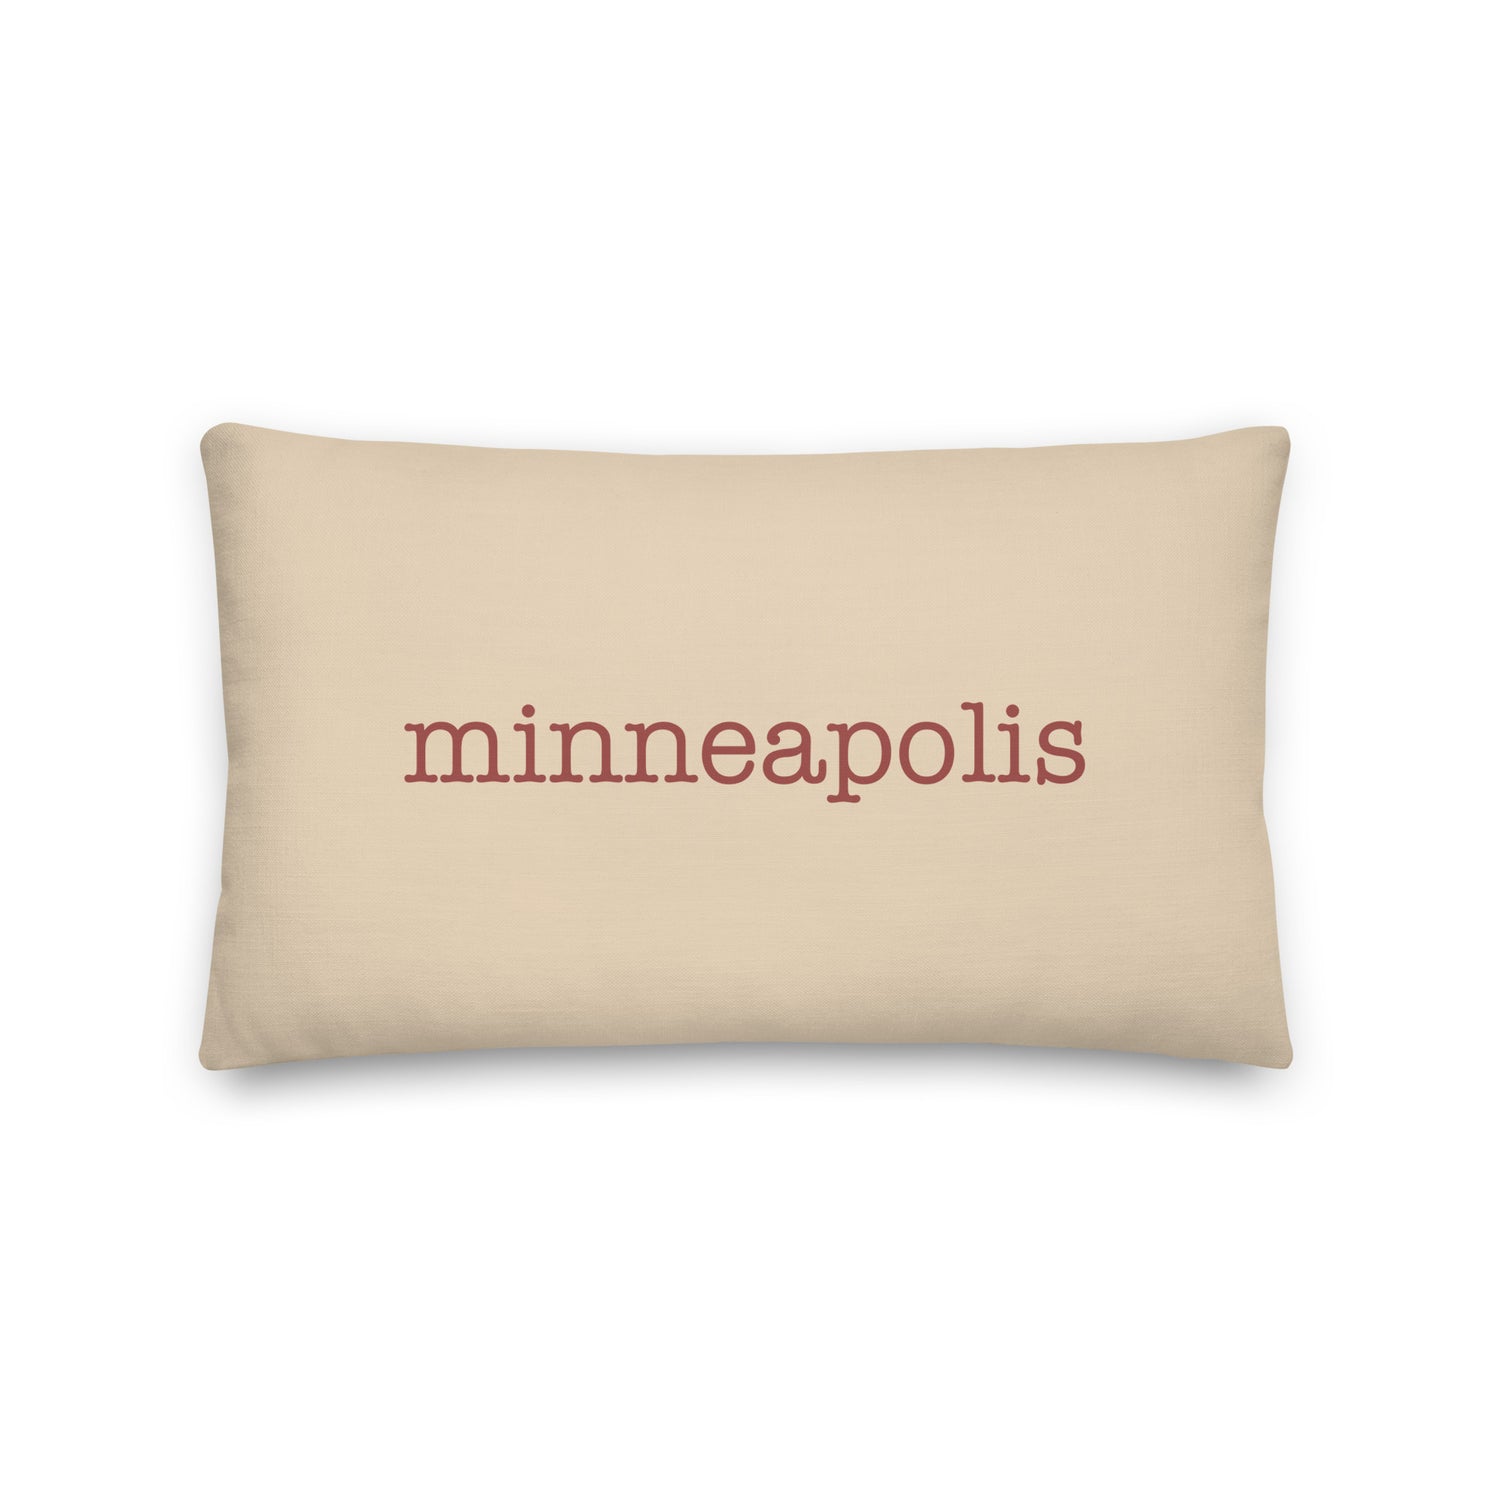 Minneapolis Minnesota Pillows and Blankets • MSP Airport Code